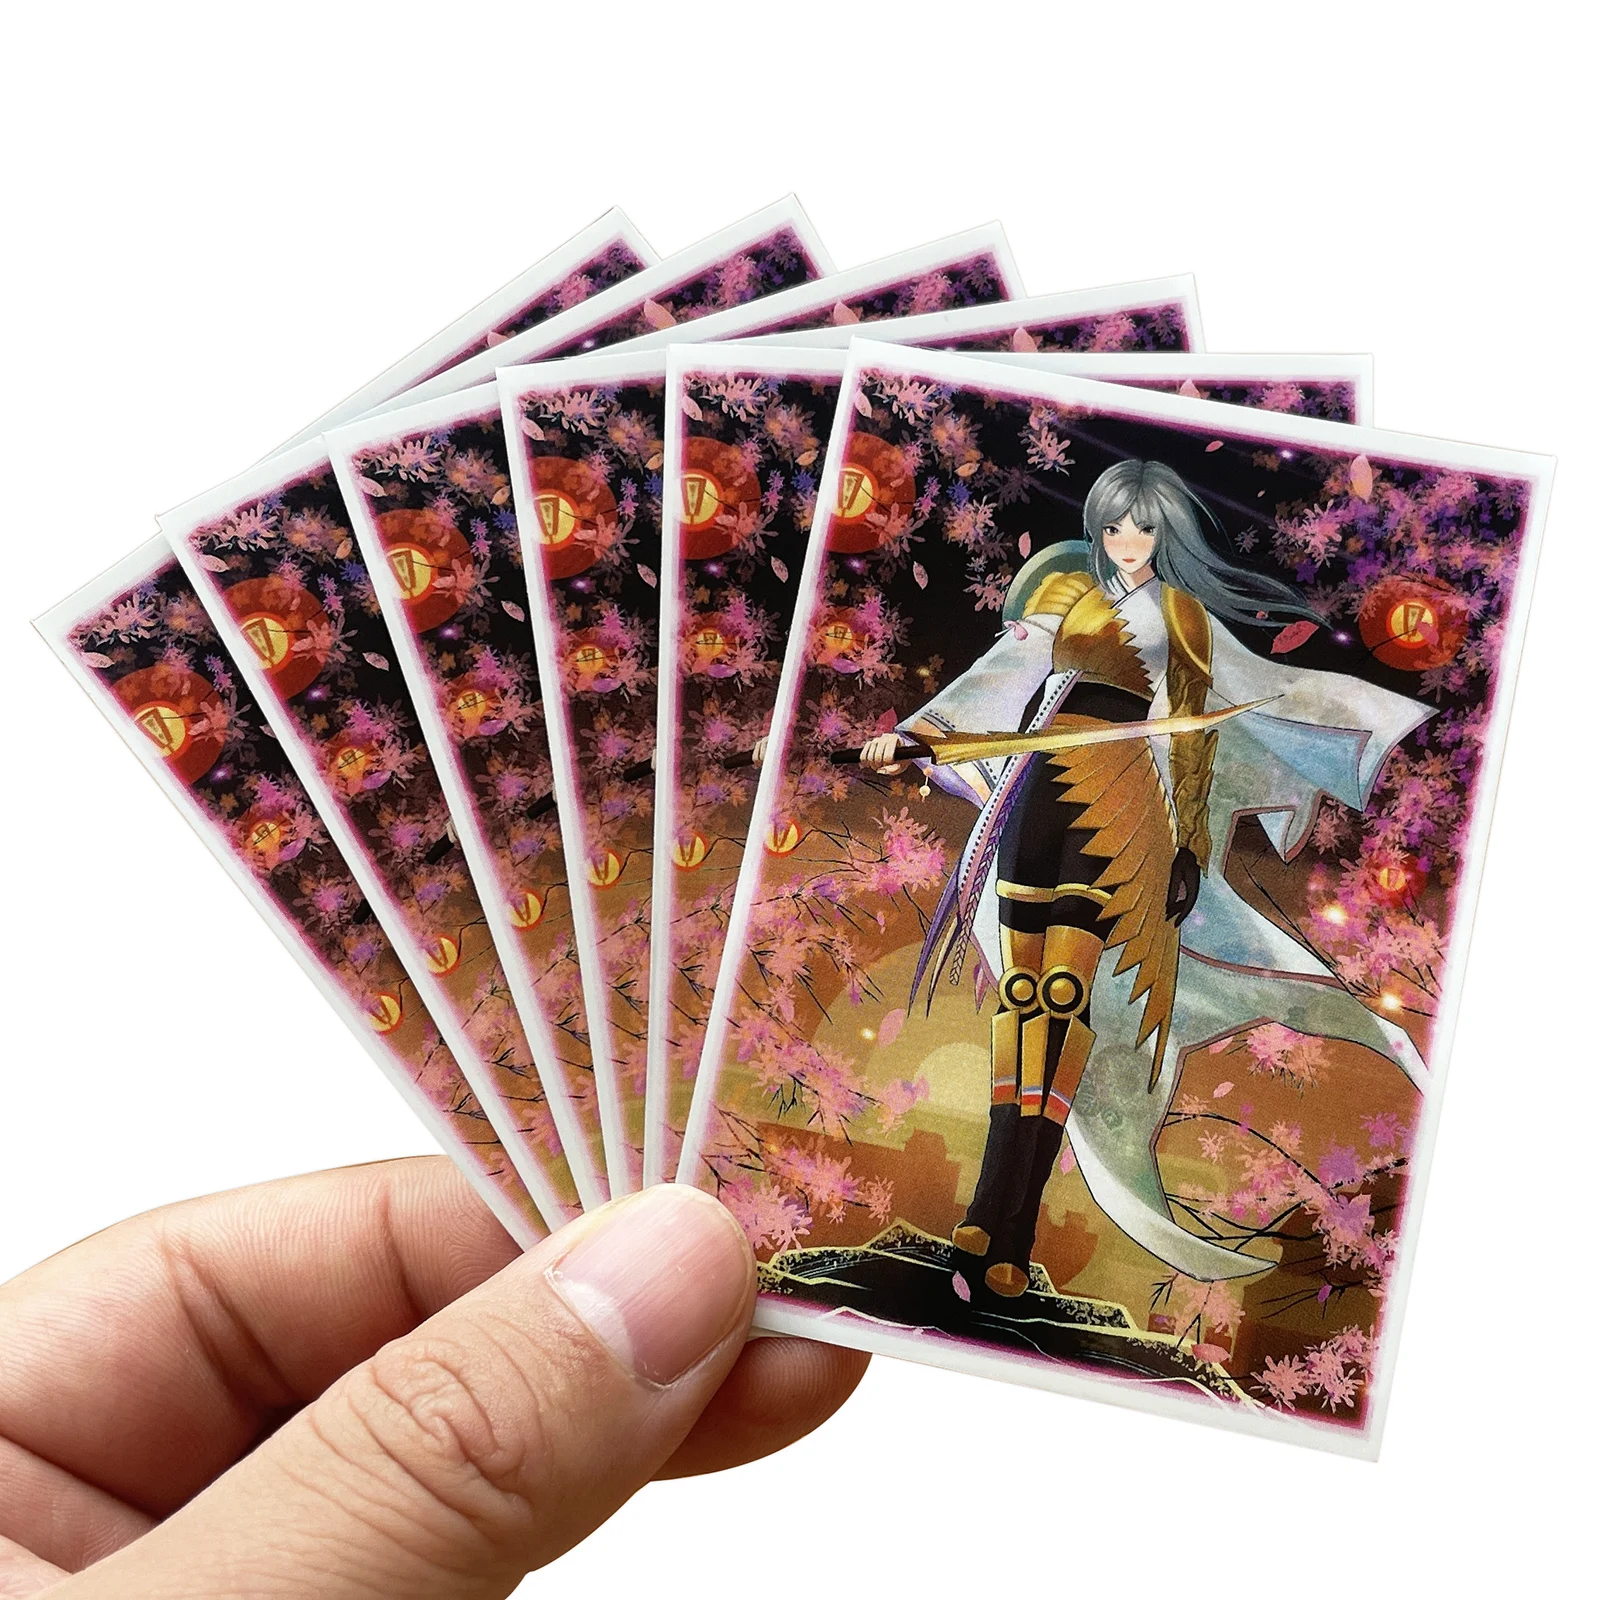 60PCS/BAG TCG Card Sleeves MGT Wandering Emperor Sleeves Game Characters Protector Cards Cover Shield Graphics Color Sleeves PKM 3080 ti 3070 3090 3060ti 1660s rx550 rx560 rx570 rx580 580 8g 588 1030 750 160 bc 160 8gb graphics card